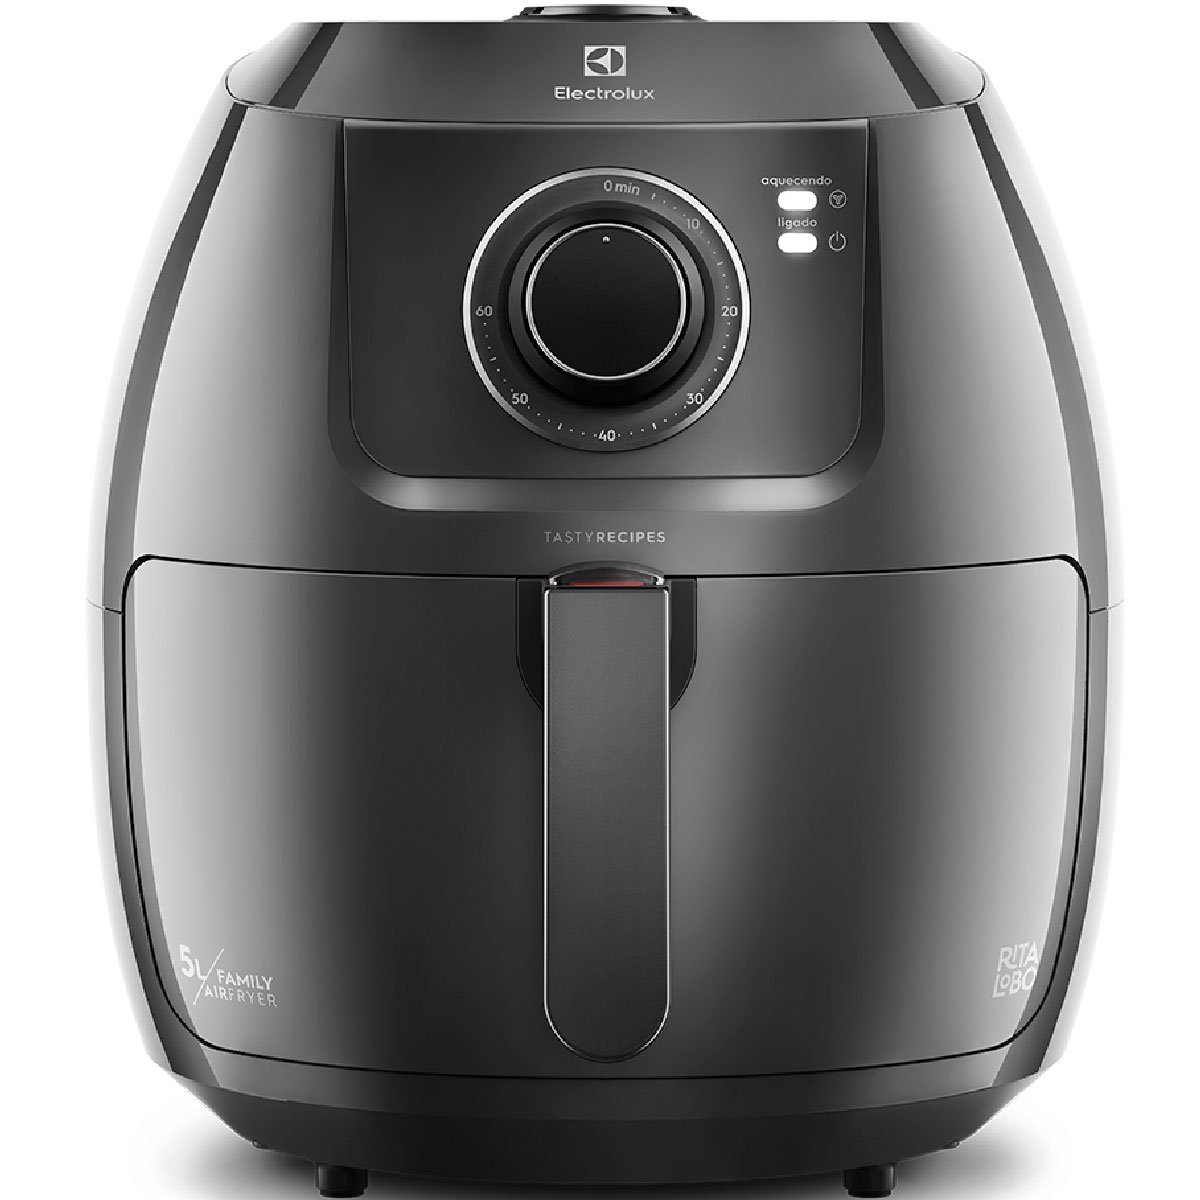 https://d3ddx6b2p2pevg.cloudfront.net/Custom/Content/Products/11/20/1120071_fritadeira-eletrica-electrolux-airfryer-family-efficient-5-litros-eaf50-na-cor-grafite_z1_638042045961798701.jpg